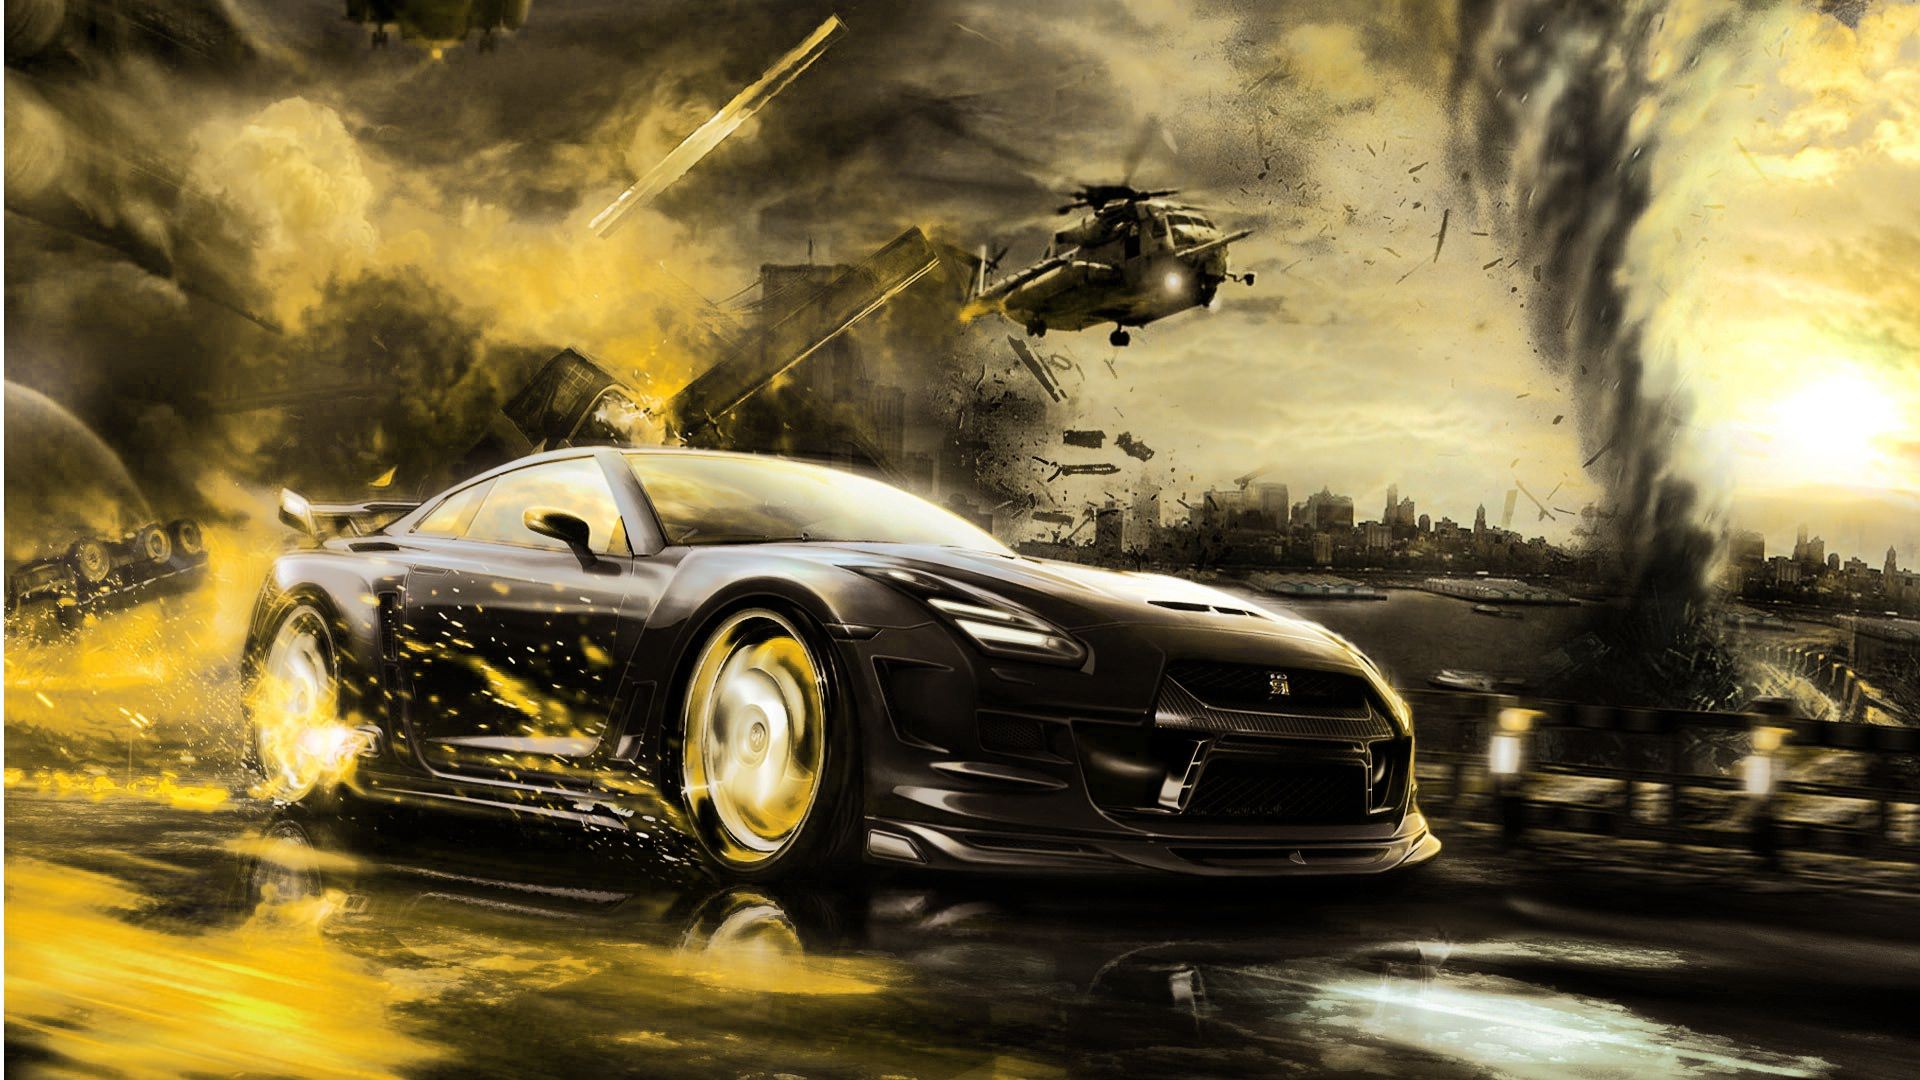 background images cars #4